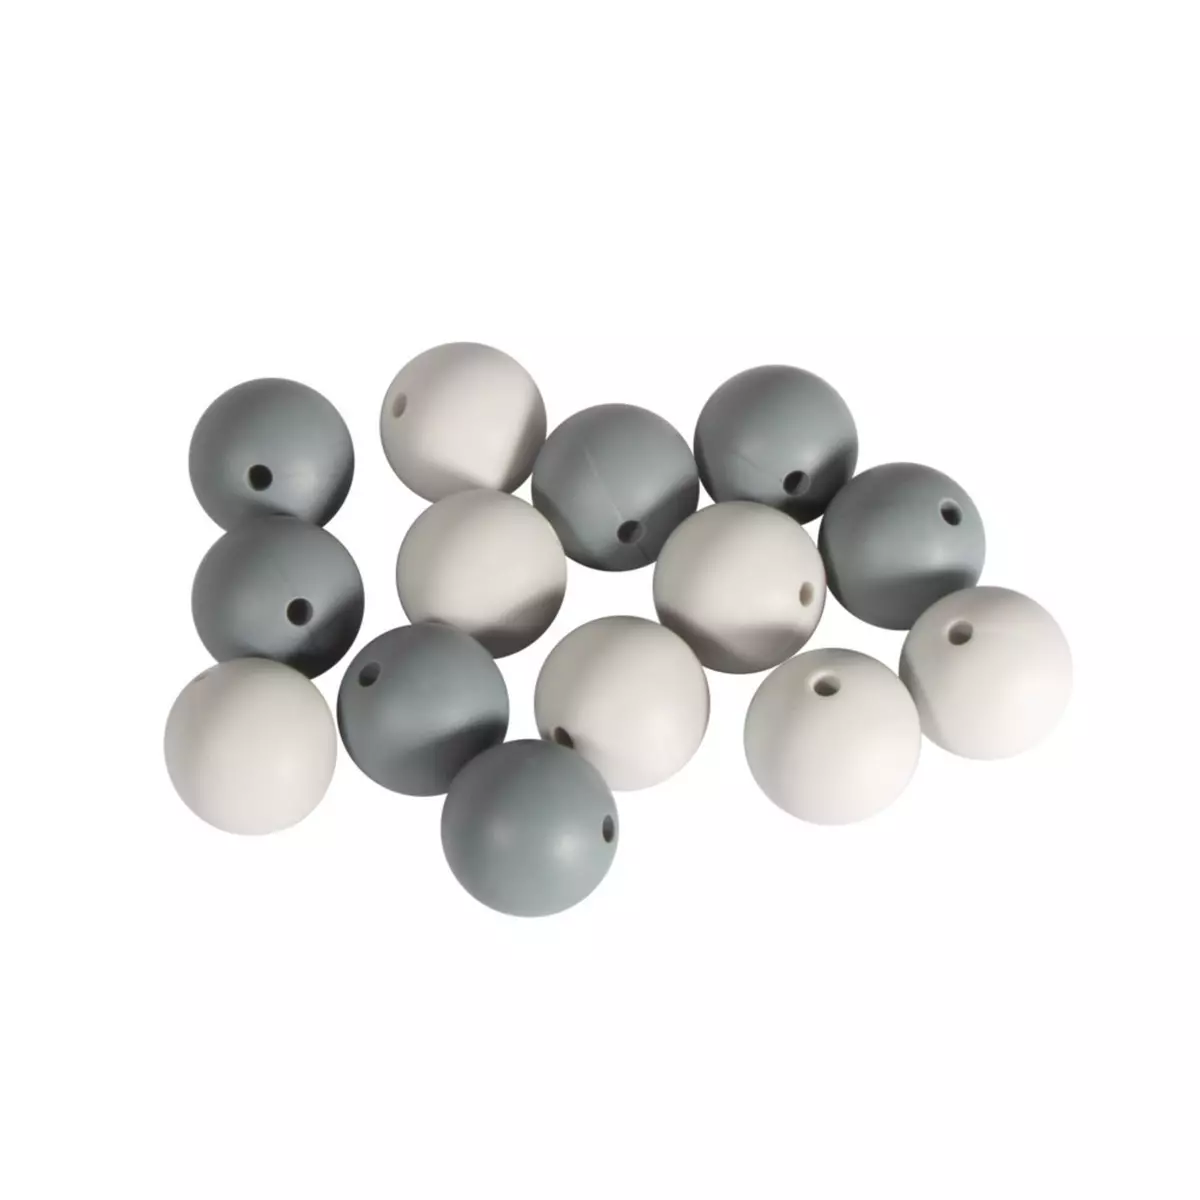 Rayher Perles en silicone, 15mm ø, tons gris, 14 pces